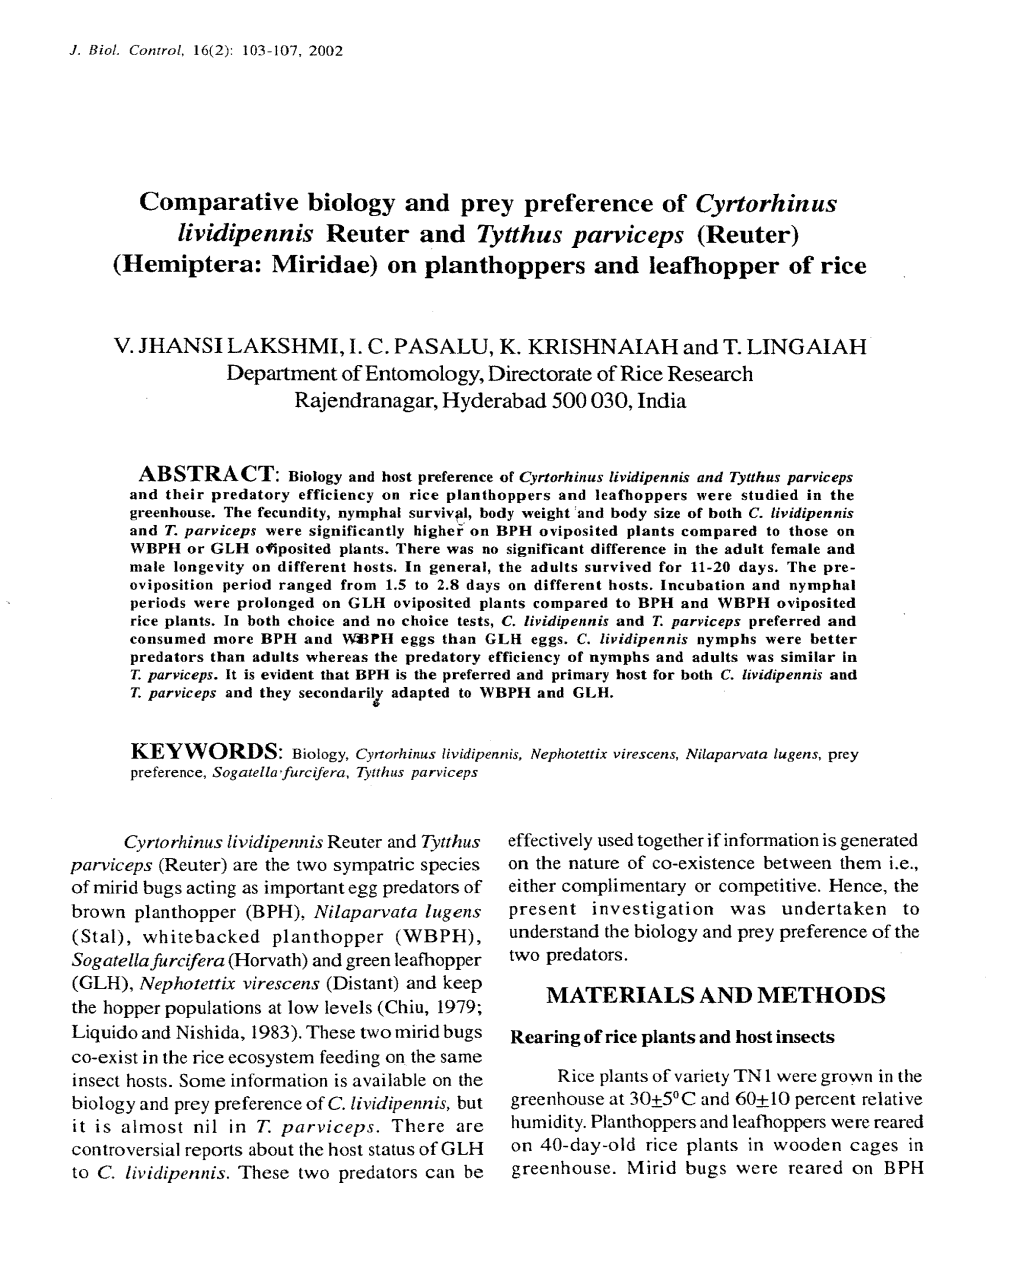 Comparative Biology and Prey Preference of Cyrtorhinus Lividipennis Reuter and Tytthus Parviceps (Reuter) (Hemiptera: Miridae) on Planthoppers and Leafbopper of Rice